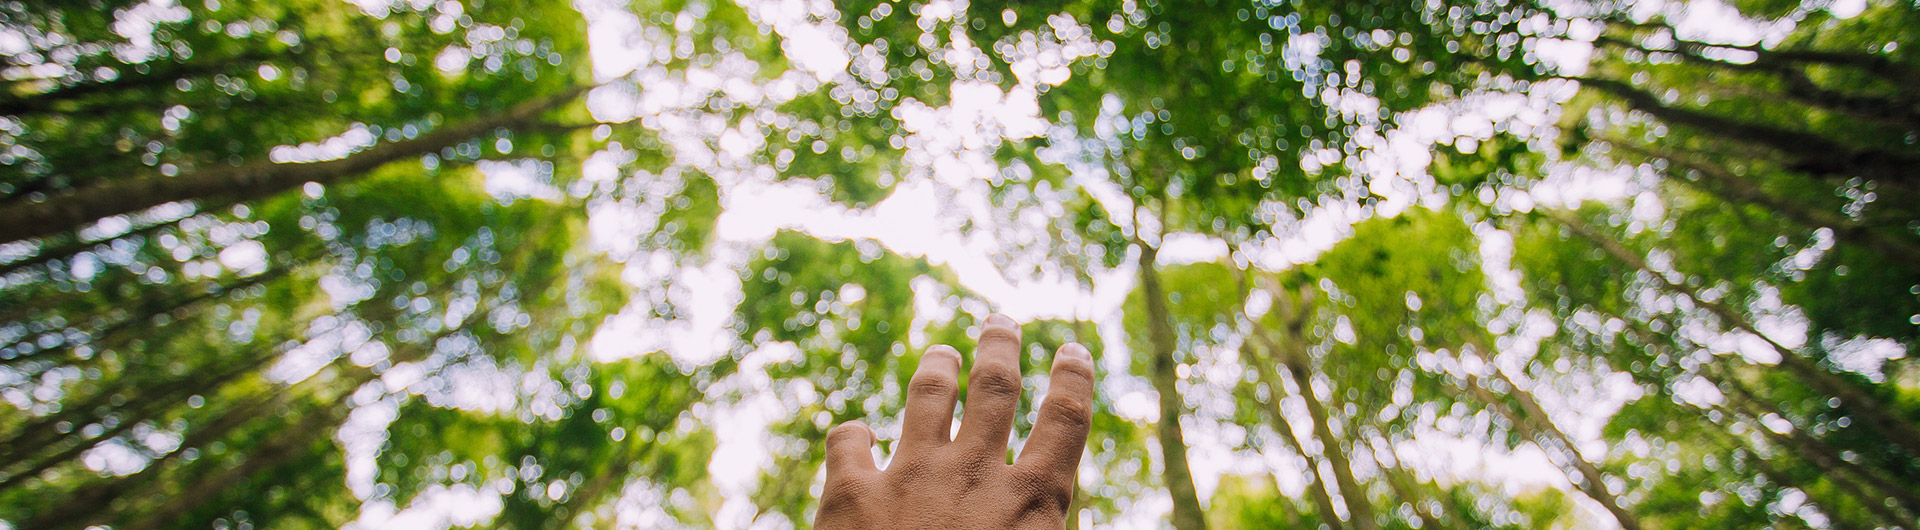 Hand reaching up towards the trees in a forest